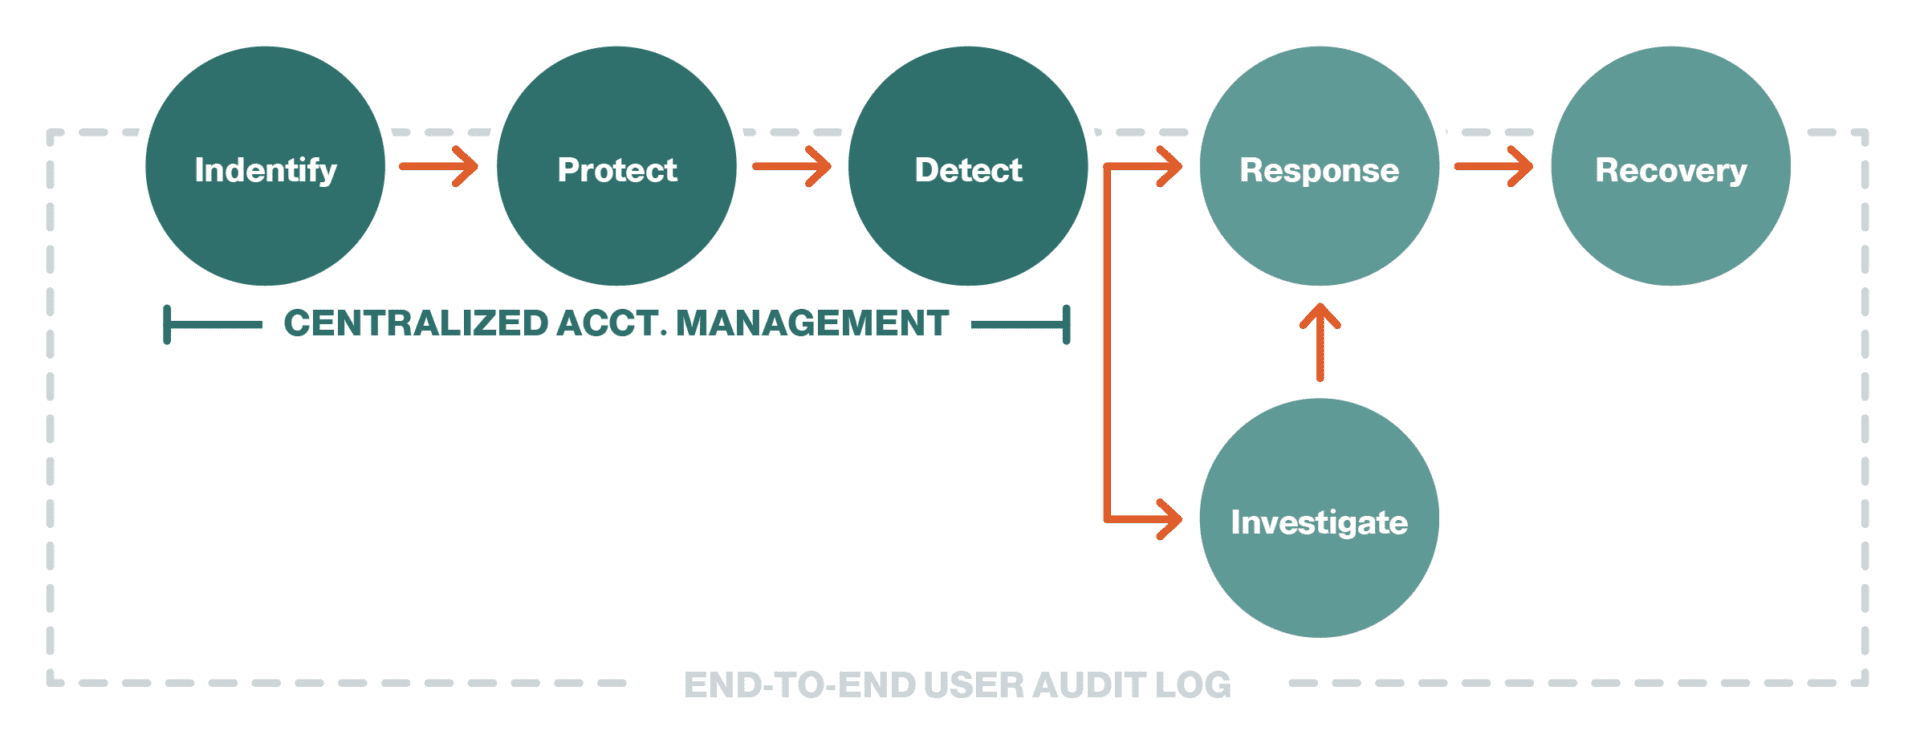 LH2_White Pages_Cybersecurity_end-to-end user audit log